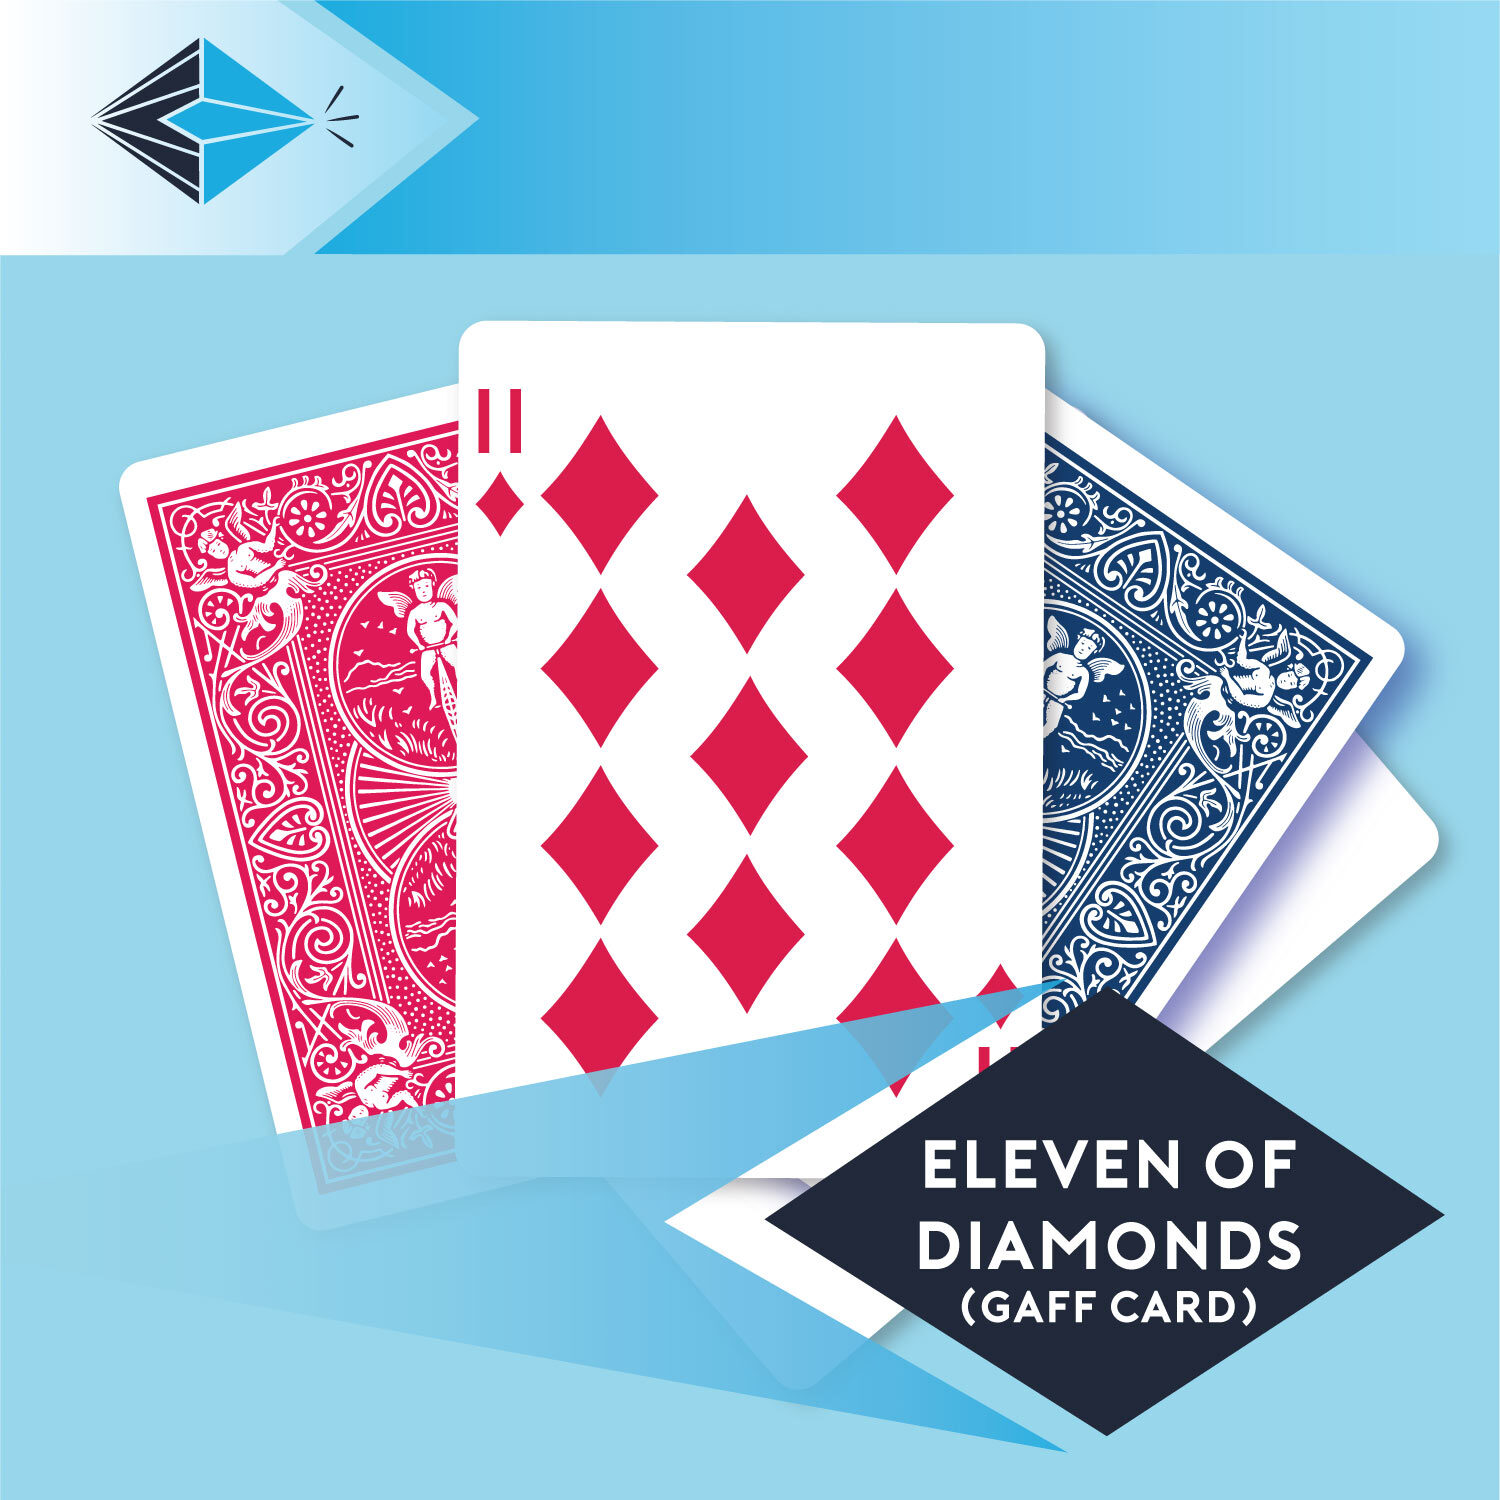 eleven of diamonds gaff card 23 playing card for magicians printing printers Stockport Manchester UK